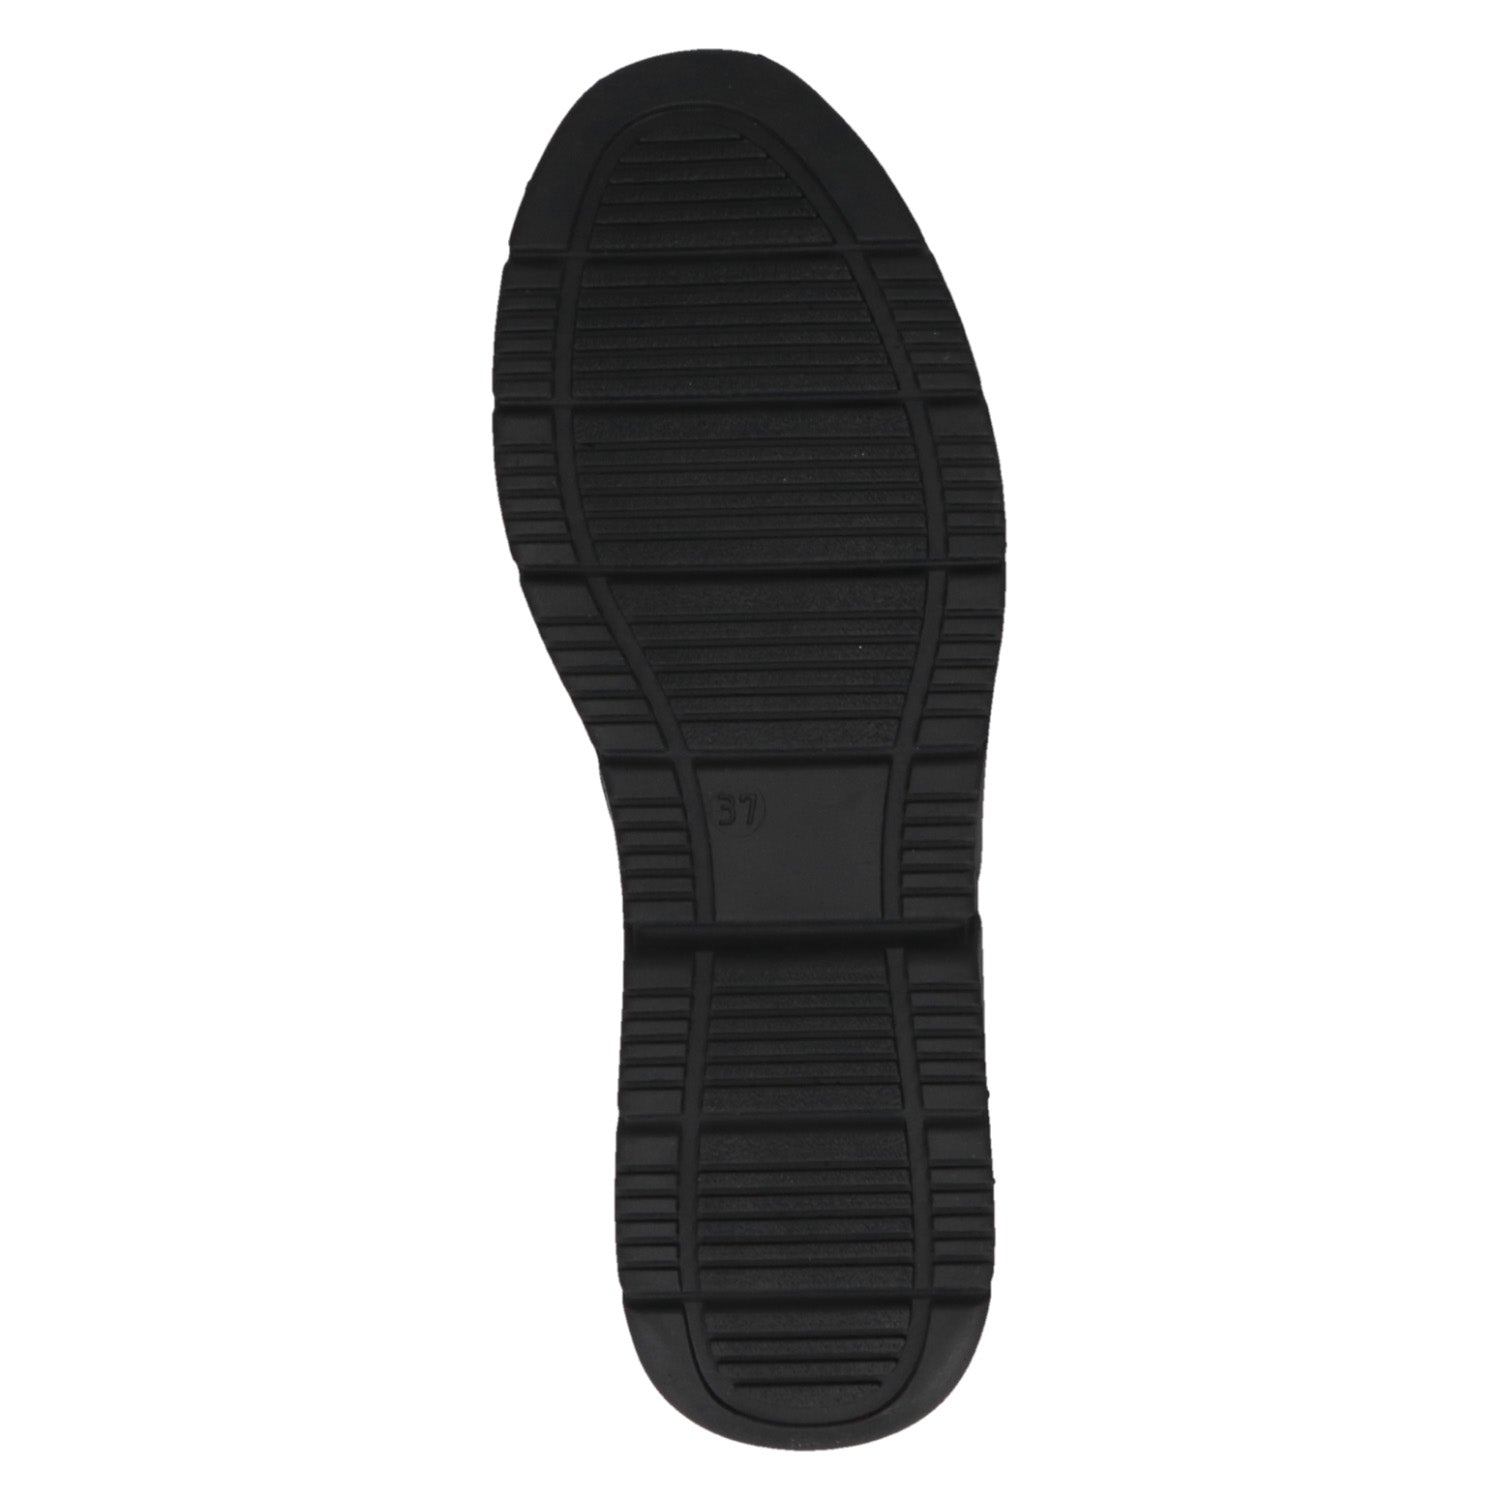 Sole and bottom heel view of Caprice Black Slip-On Shoe.